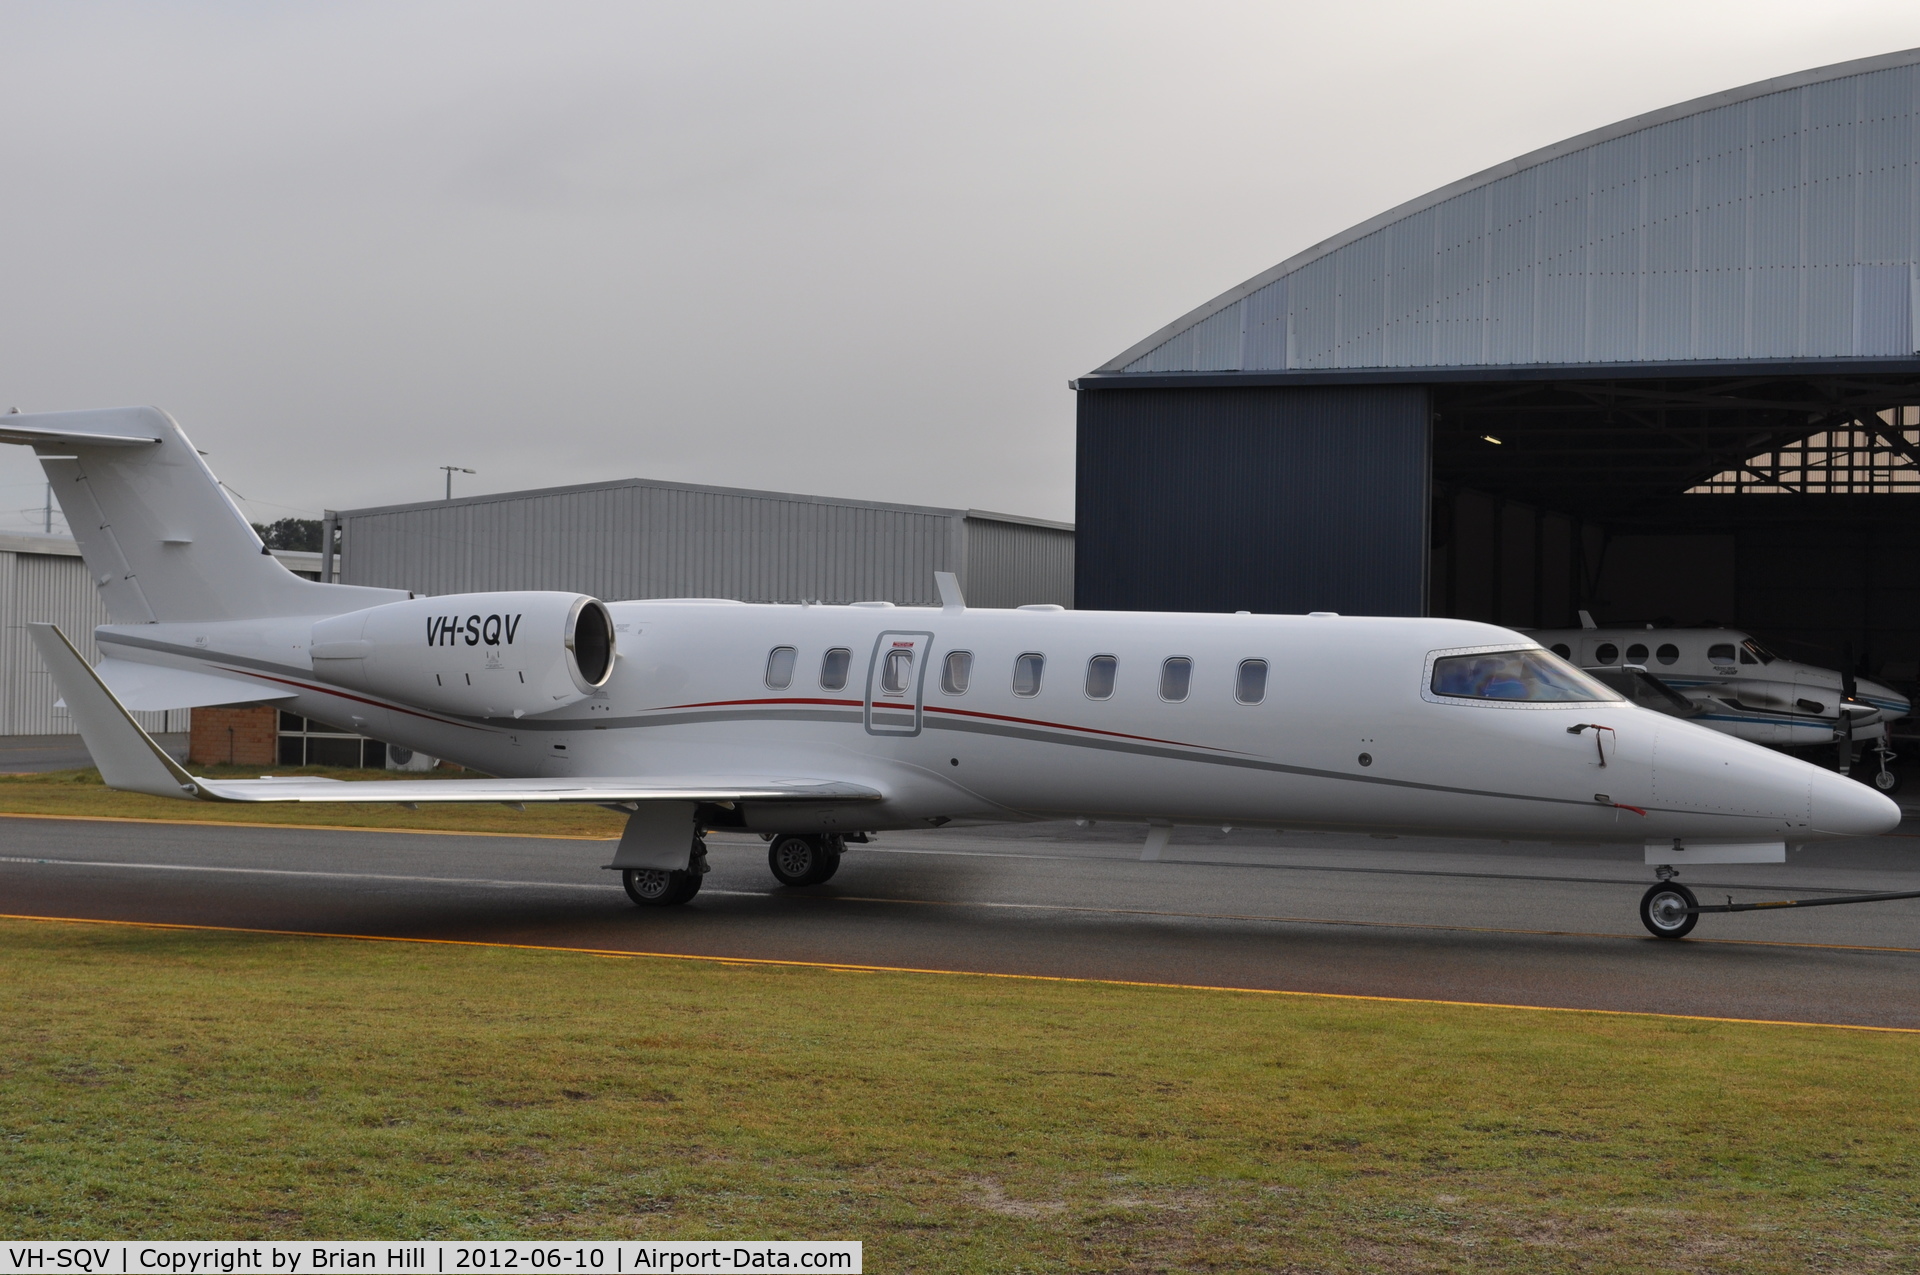 VH-SQV, 2002 Learjet 45 C/N 45-207, VH-SQV after painting at Jandakot Airport.